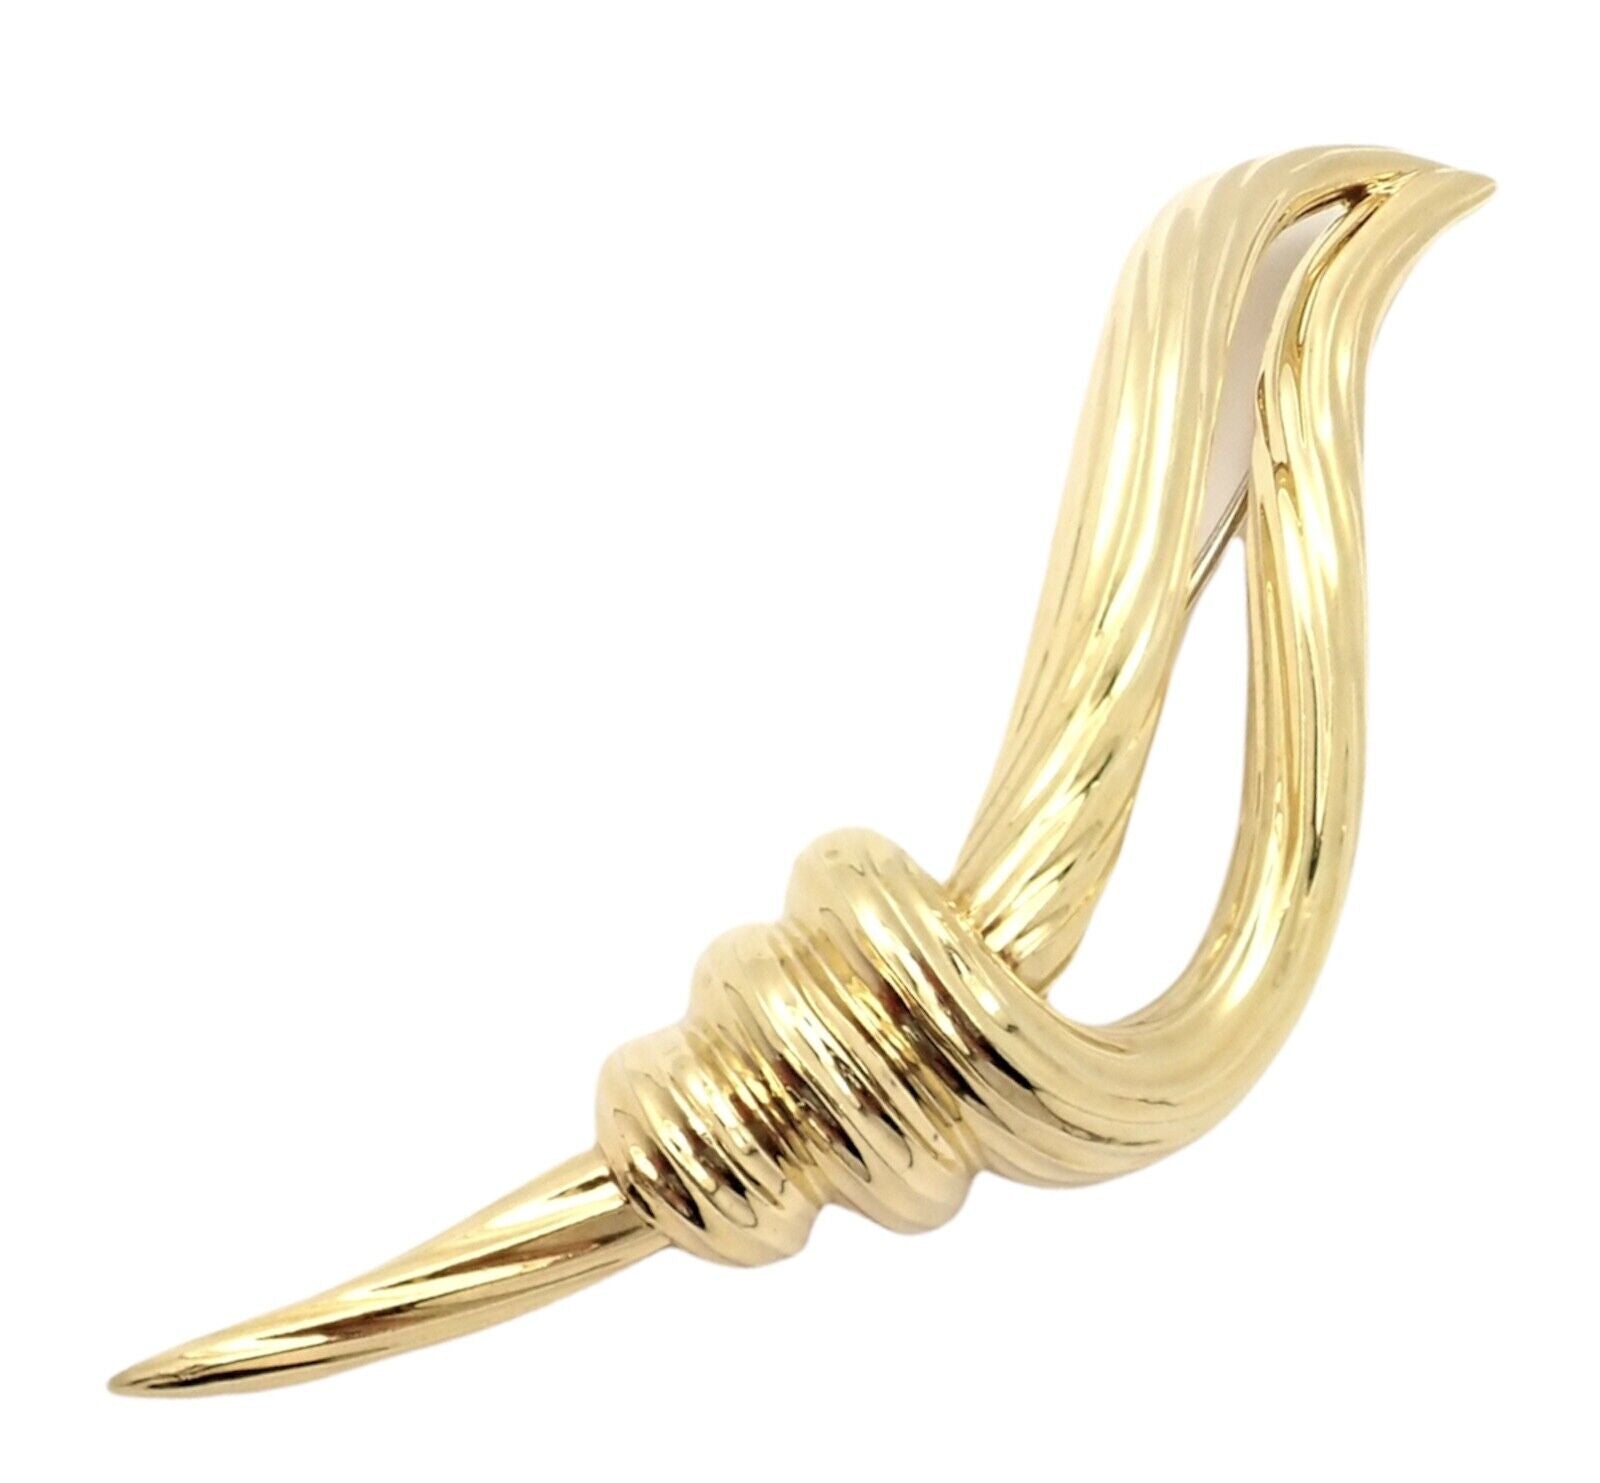 Henry Dunay Jewelry & Watches:Fashion Jewelry:Brooches & Pins Rare! Authentic Henry Dunay 18k Yellow Gold Olympic Torch Pin Brooch